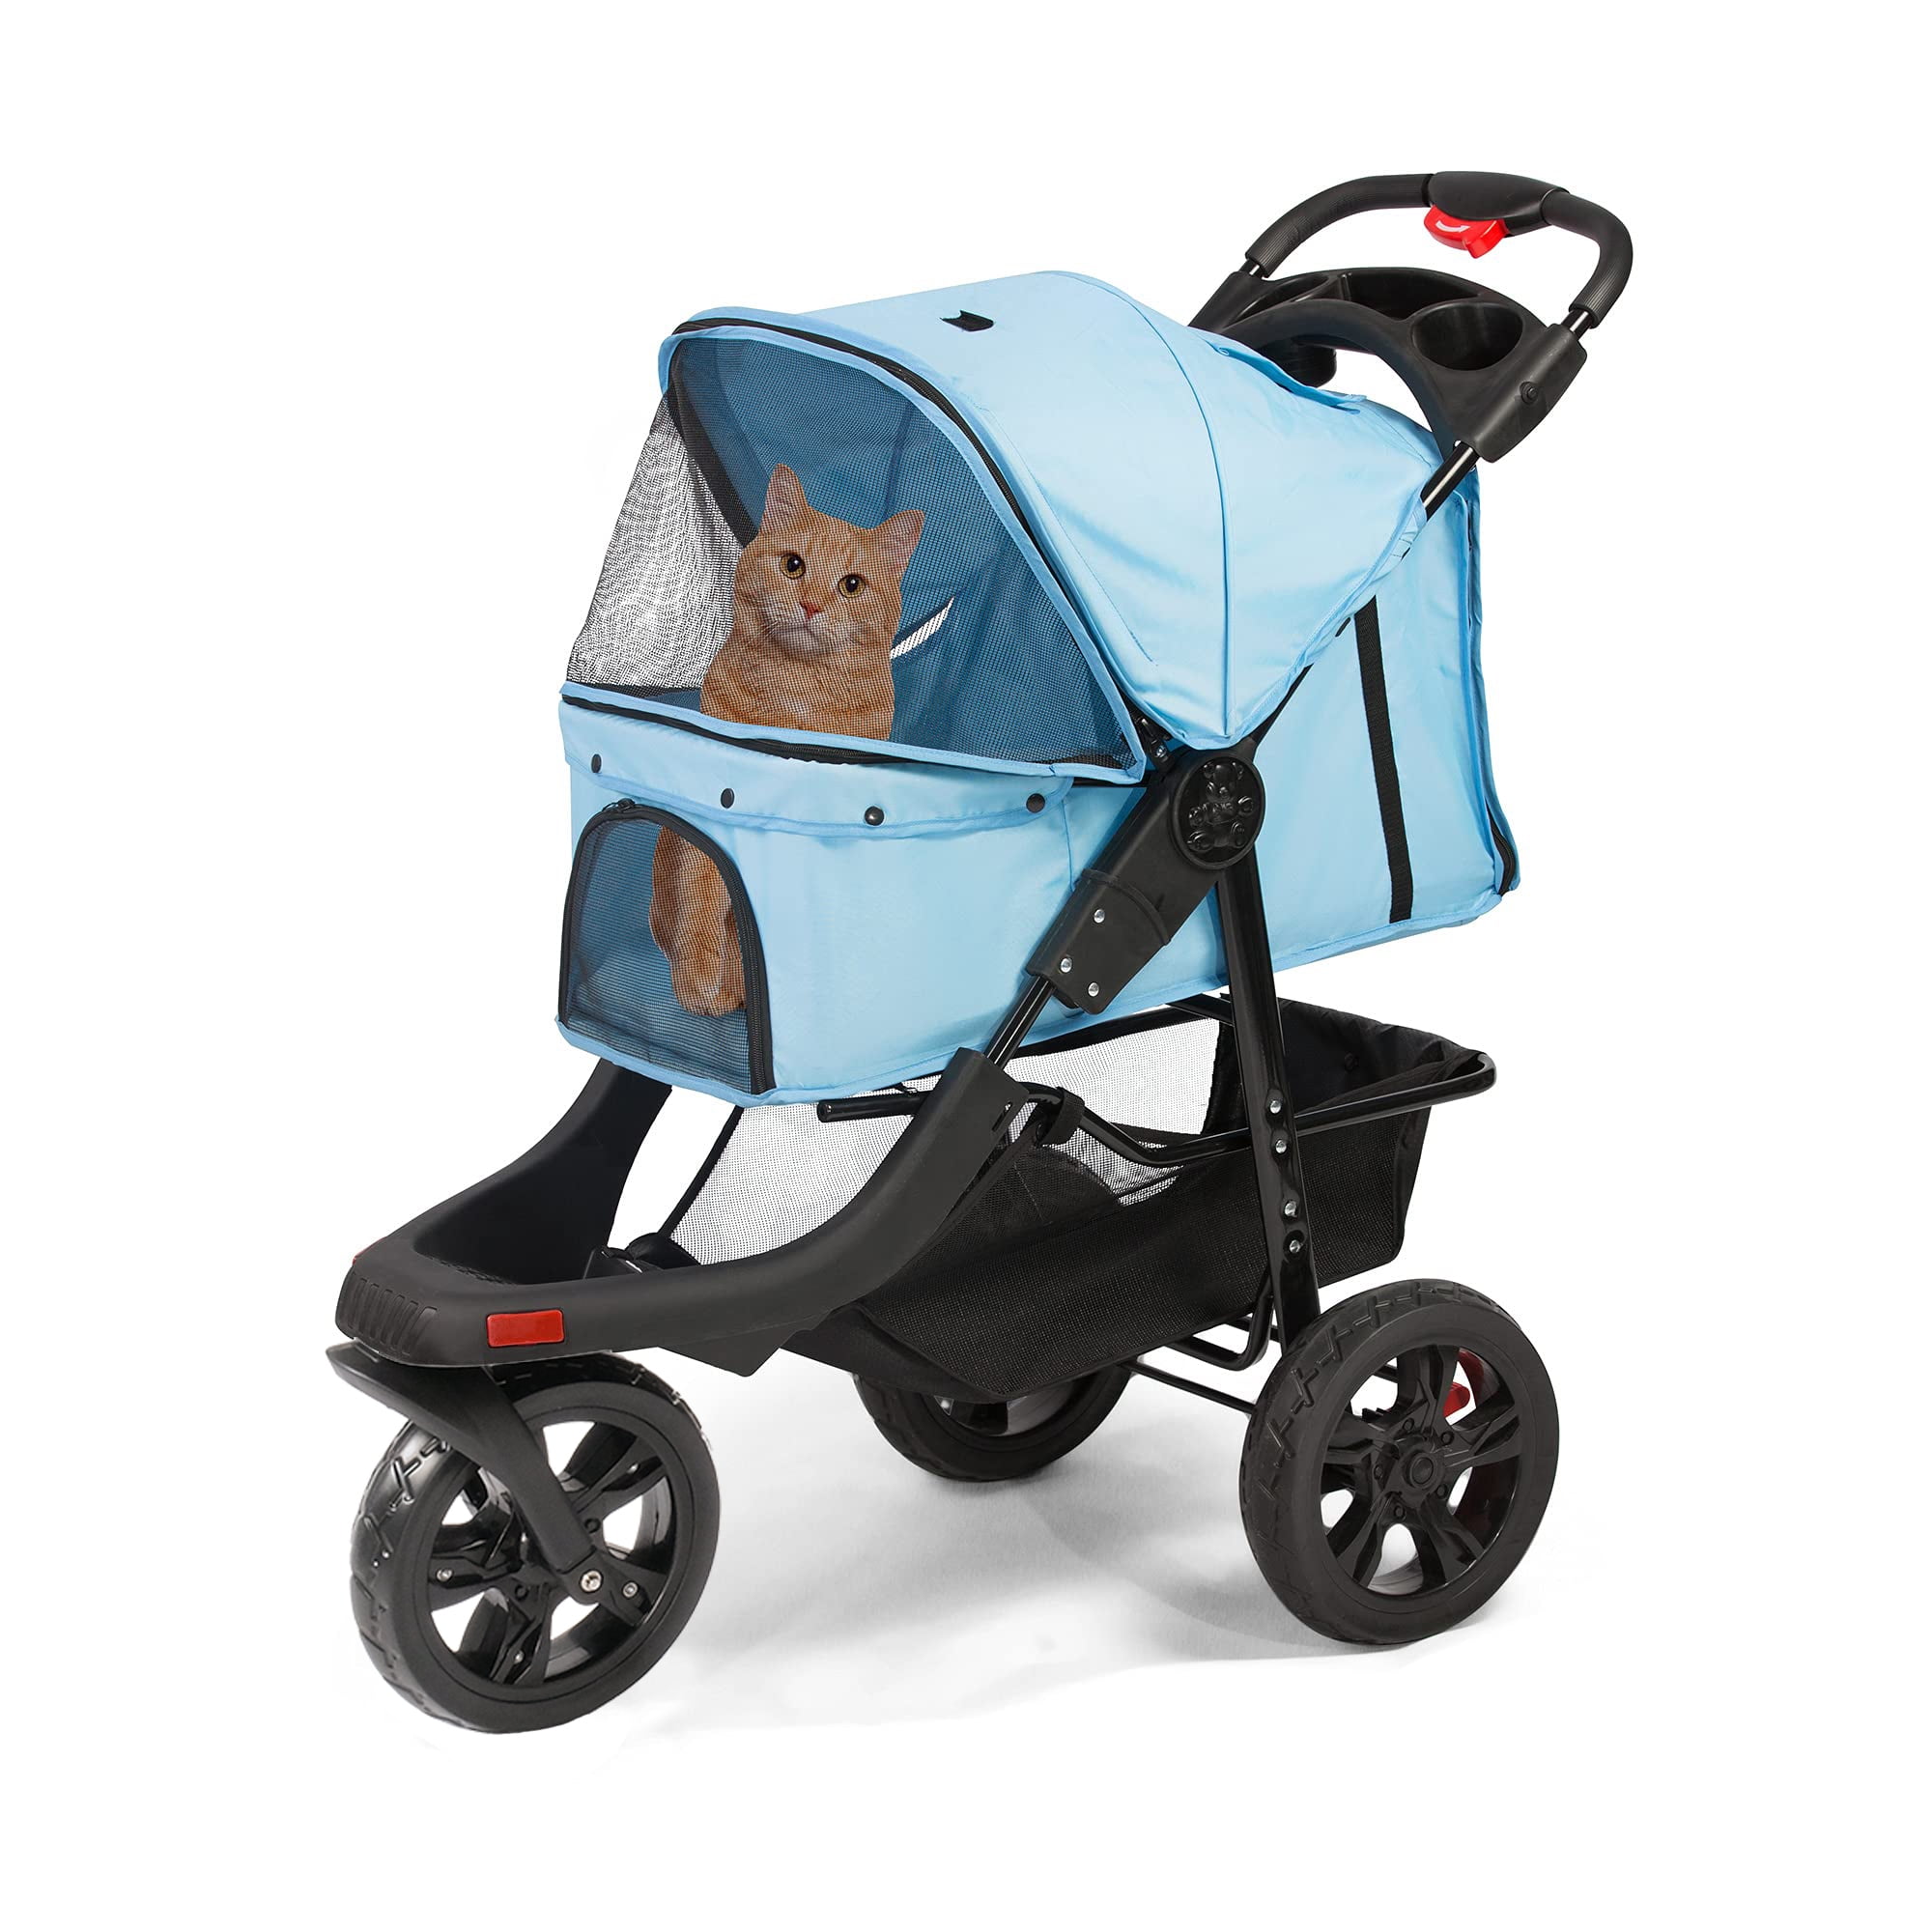 KARMAS PRODUCT Pet Stroller for Dog Cat Small Animal Folding Walk Jogger Travel Carrier Cart with Three Wheels/Four Wheels 